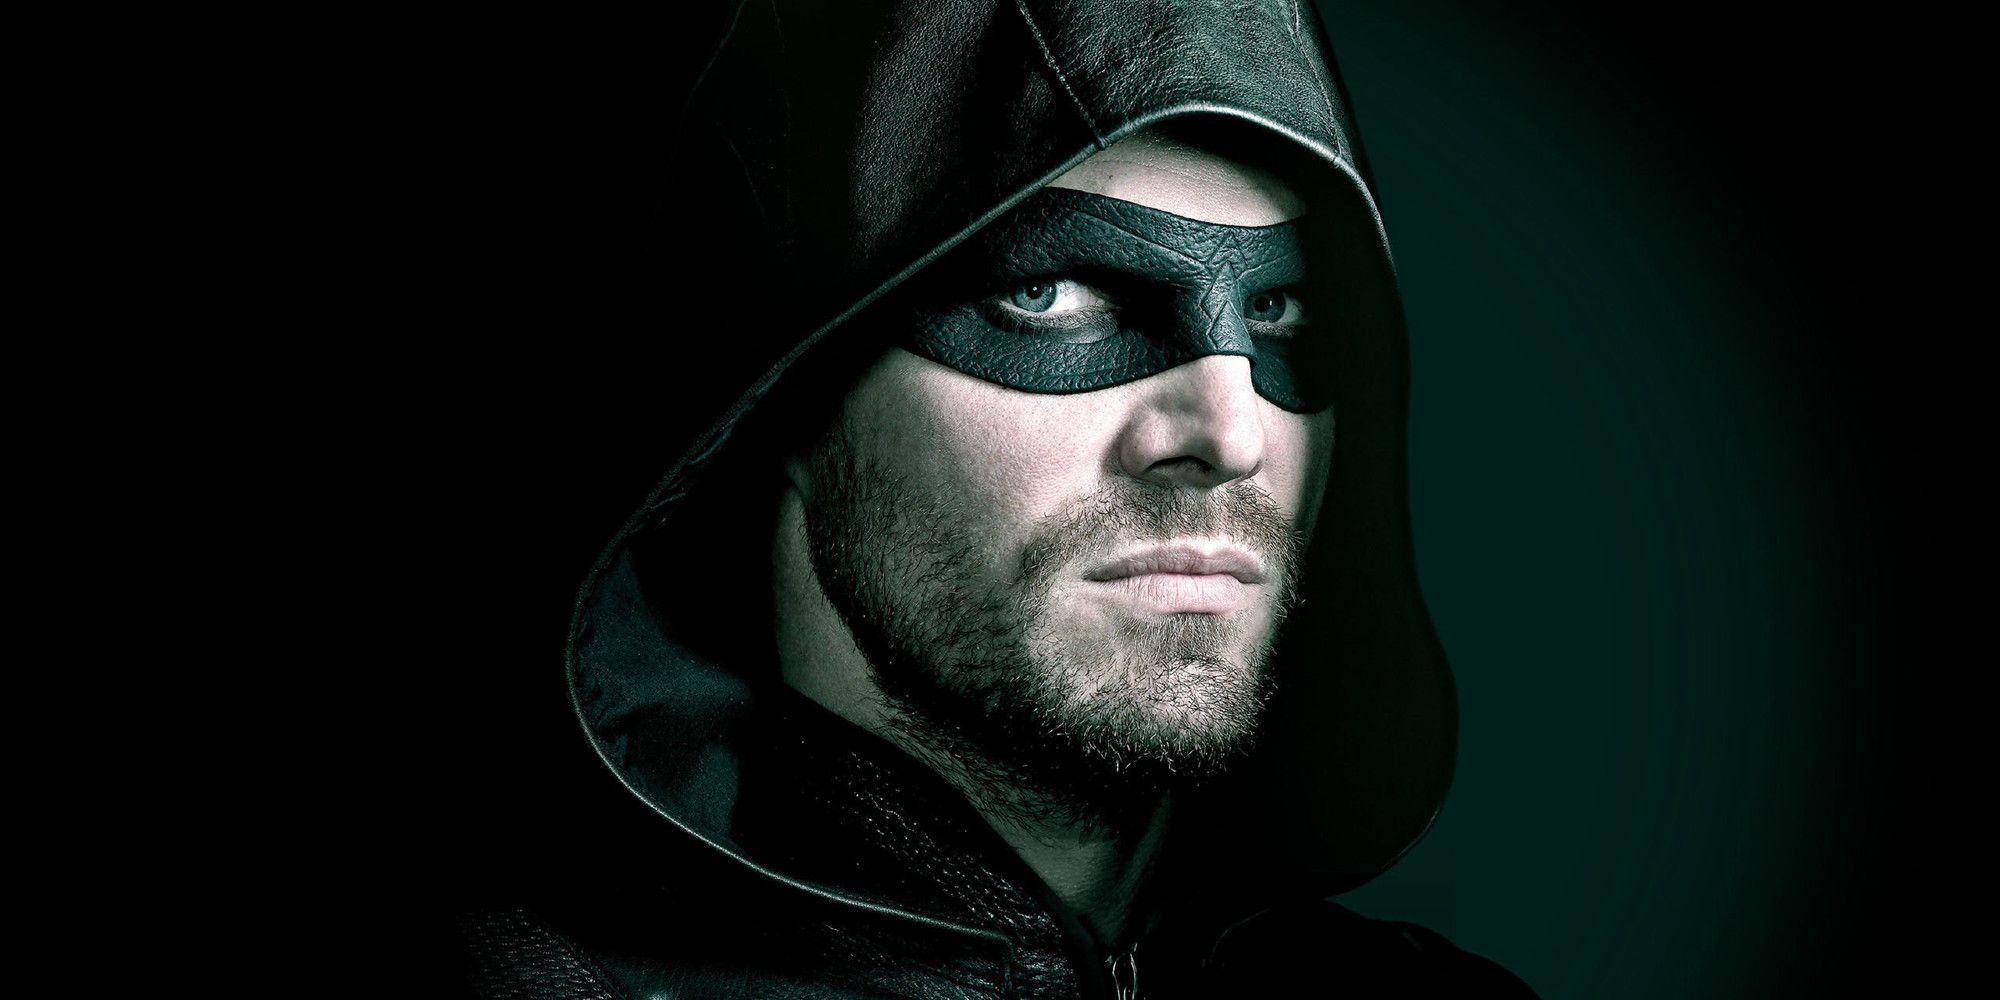 Stephen Amell dons Oliver Queen's signature costume as Green Arrow.